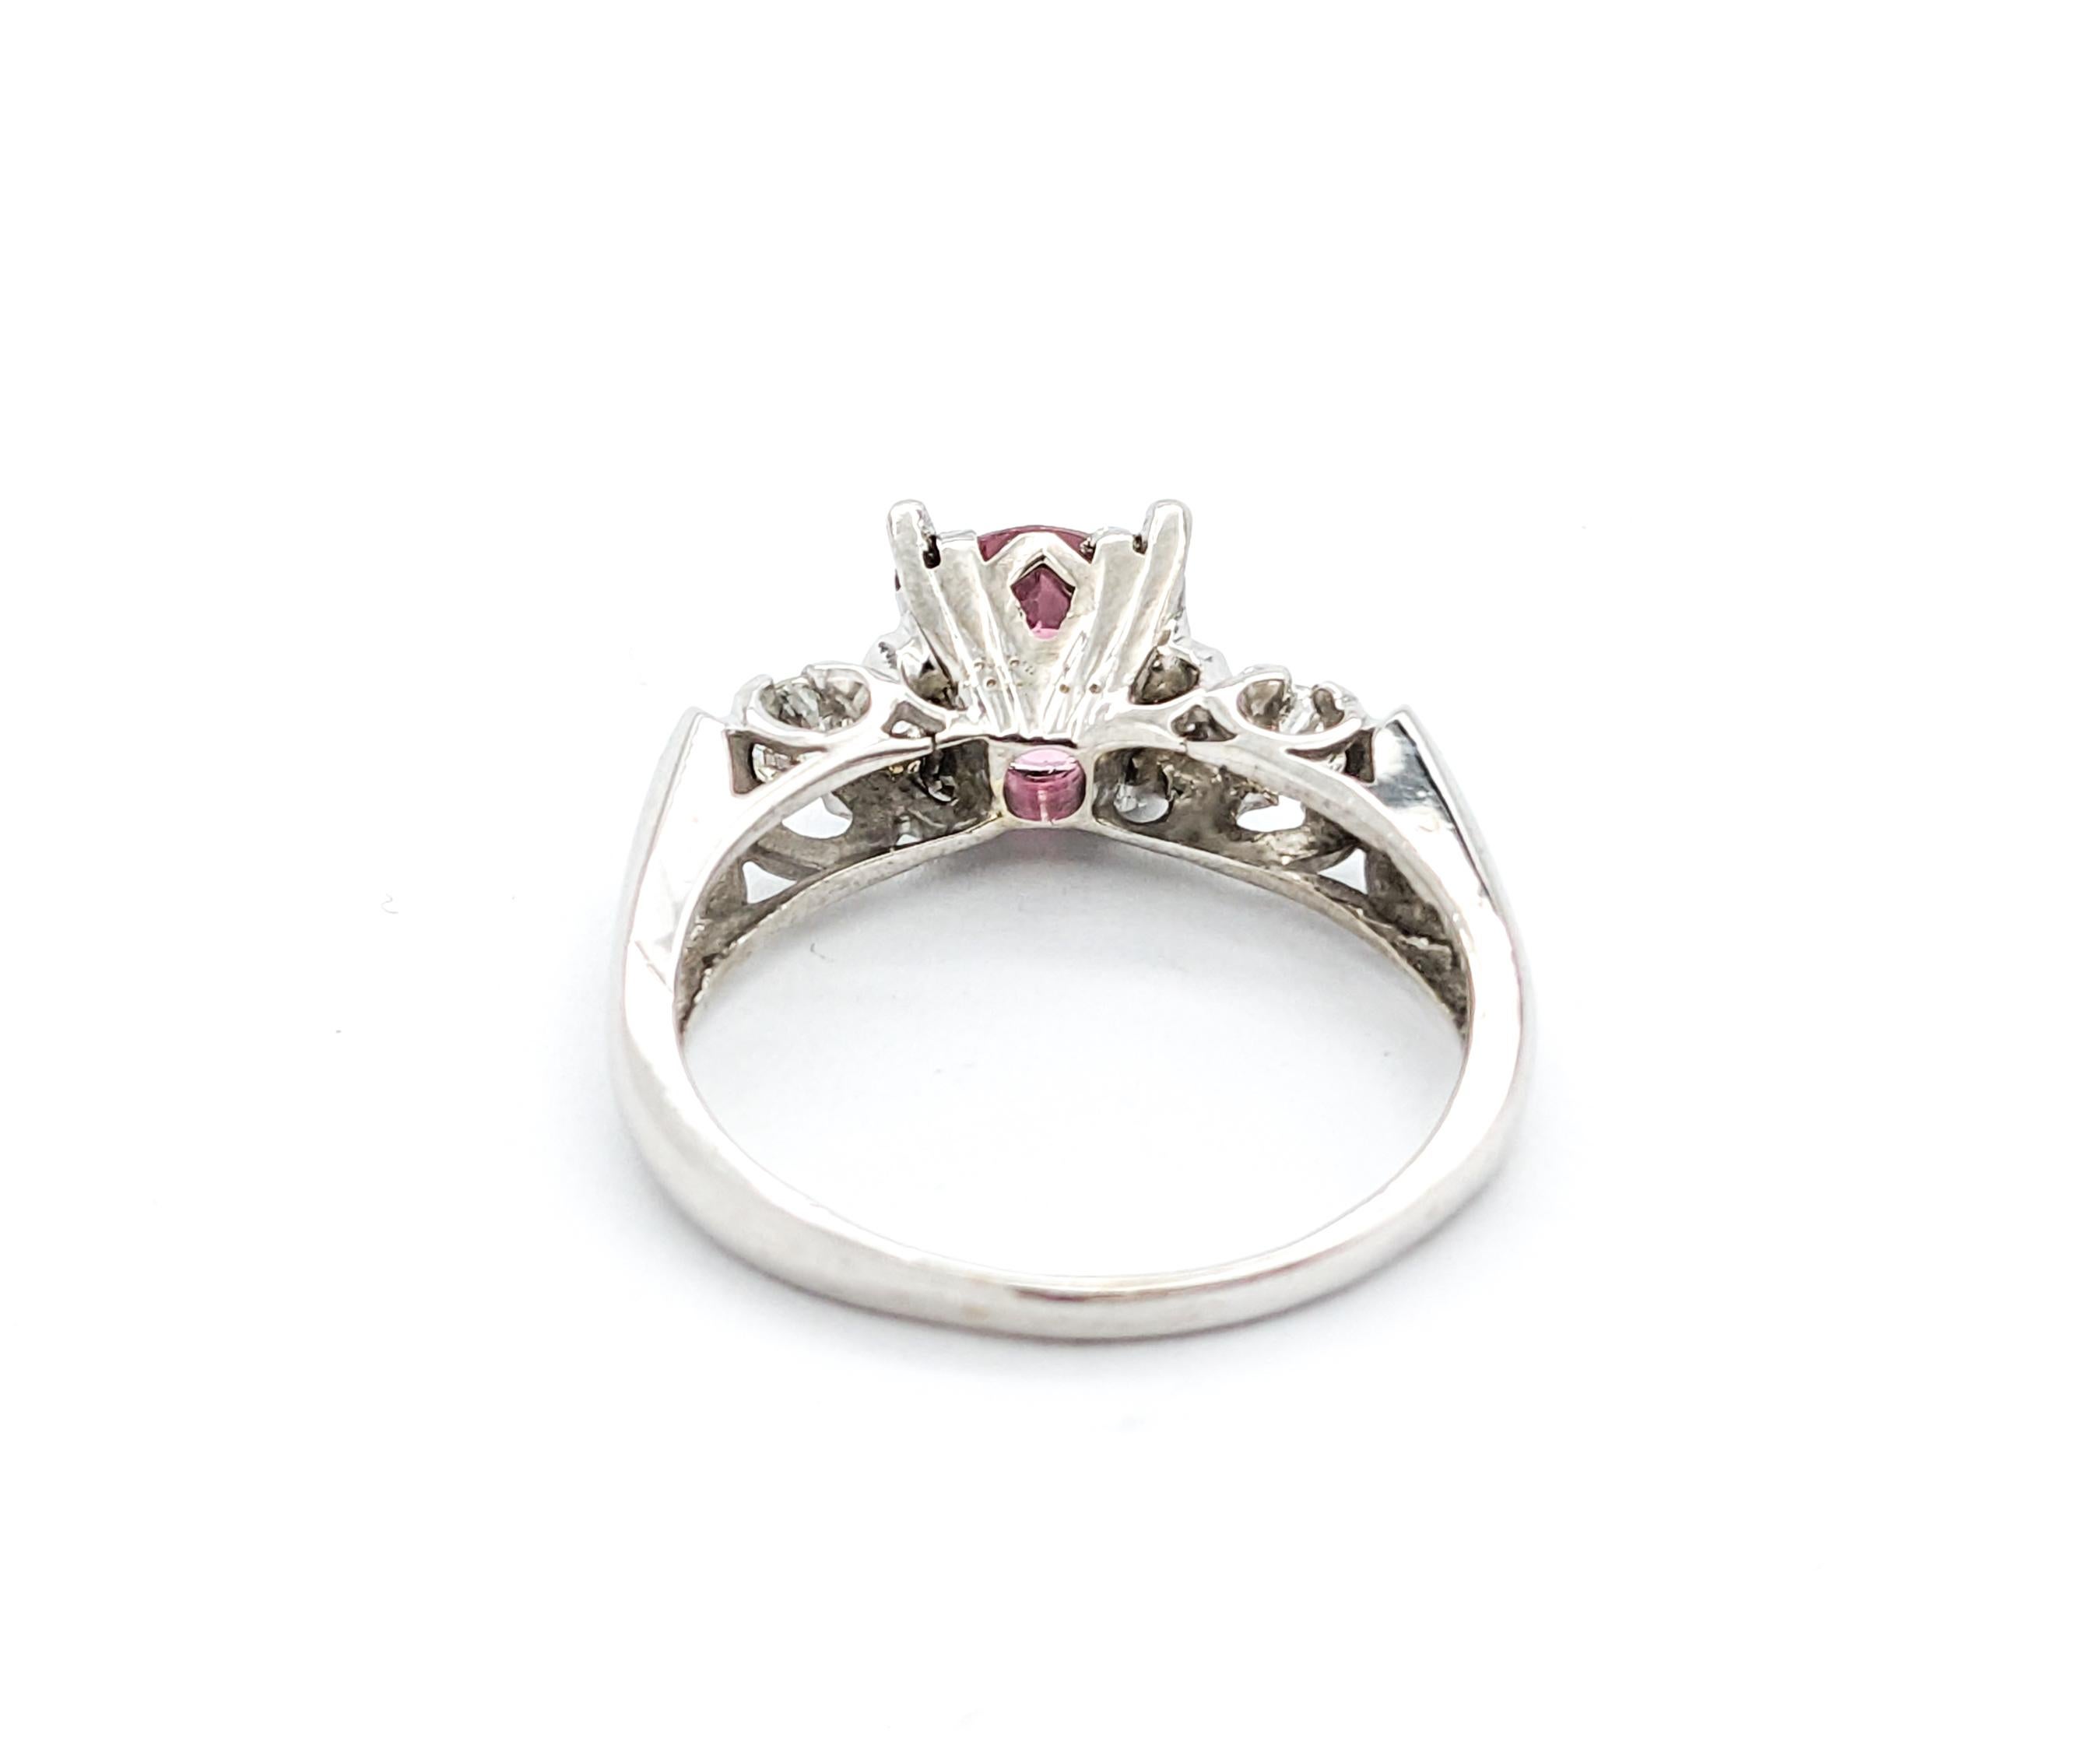 Vintage 1.48ct Pink Tourmaline & Diamonds Ring White Gold In Excellent Condition For Sale In Bloomington, MN